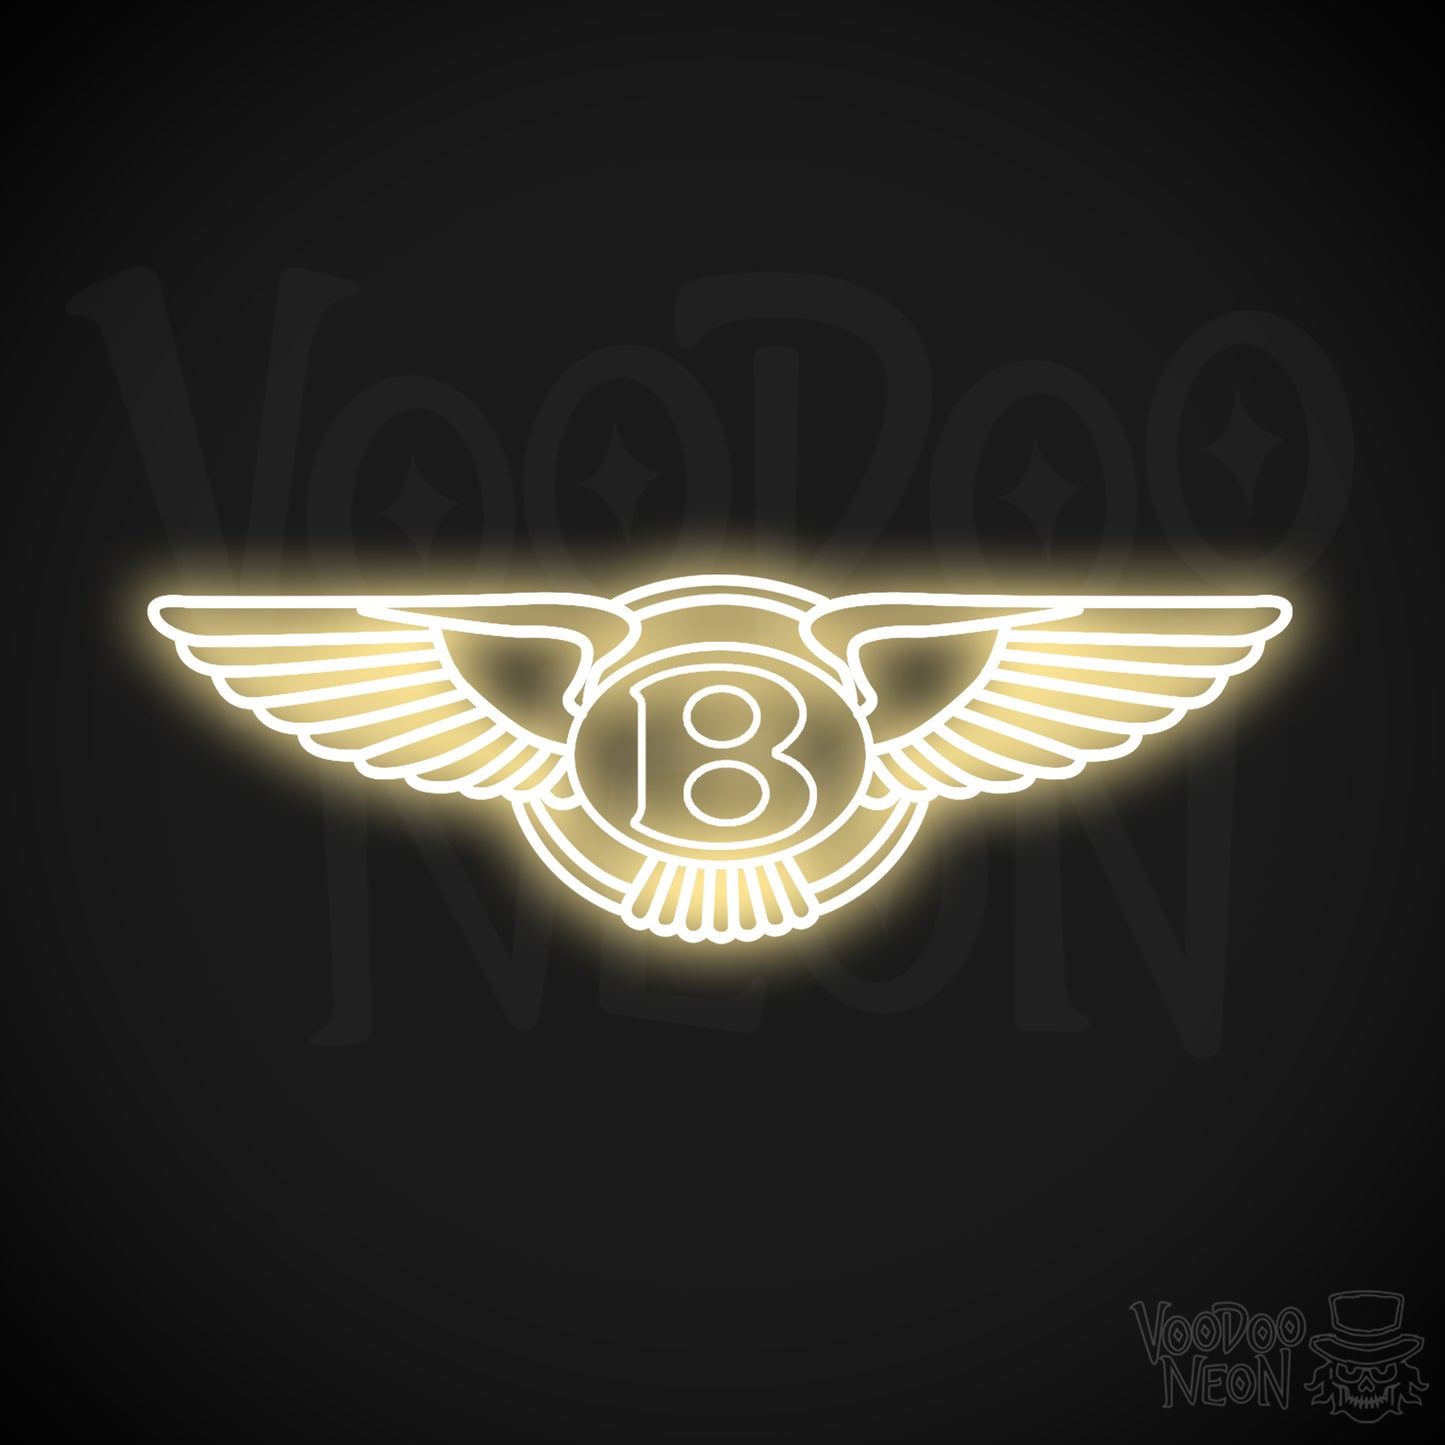 Bently Neon Sign - Bently Sign - Bently Decor - Wall Art - Color Warm White